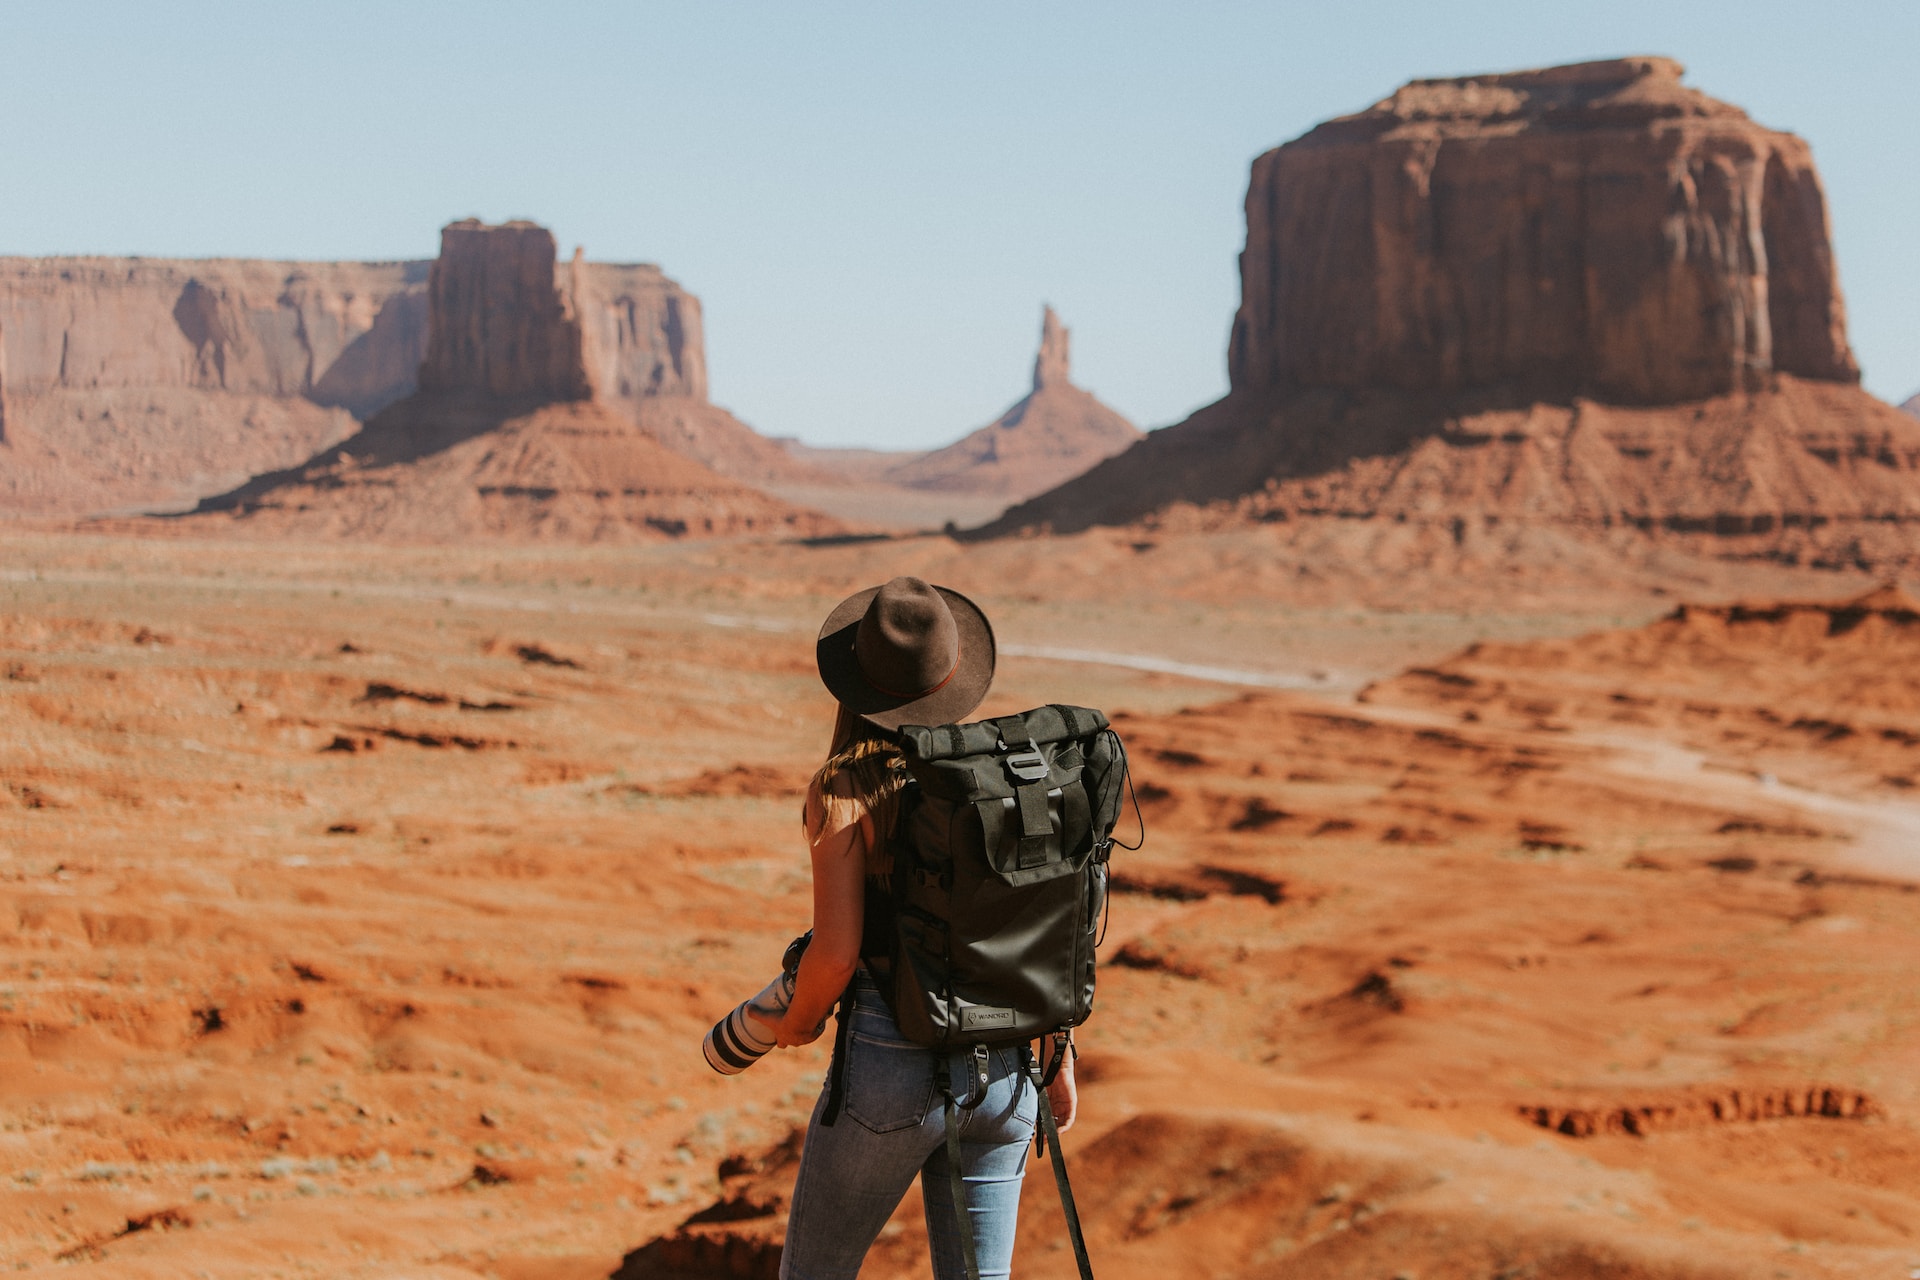 A woman on a solo travel adventure.